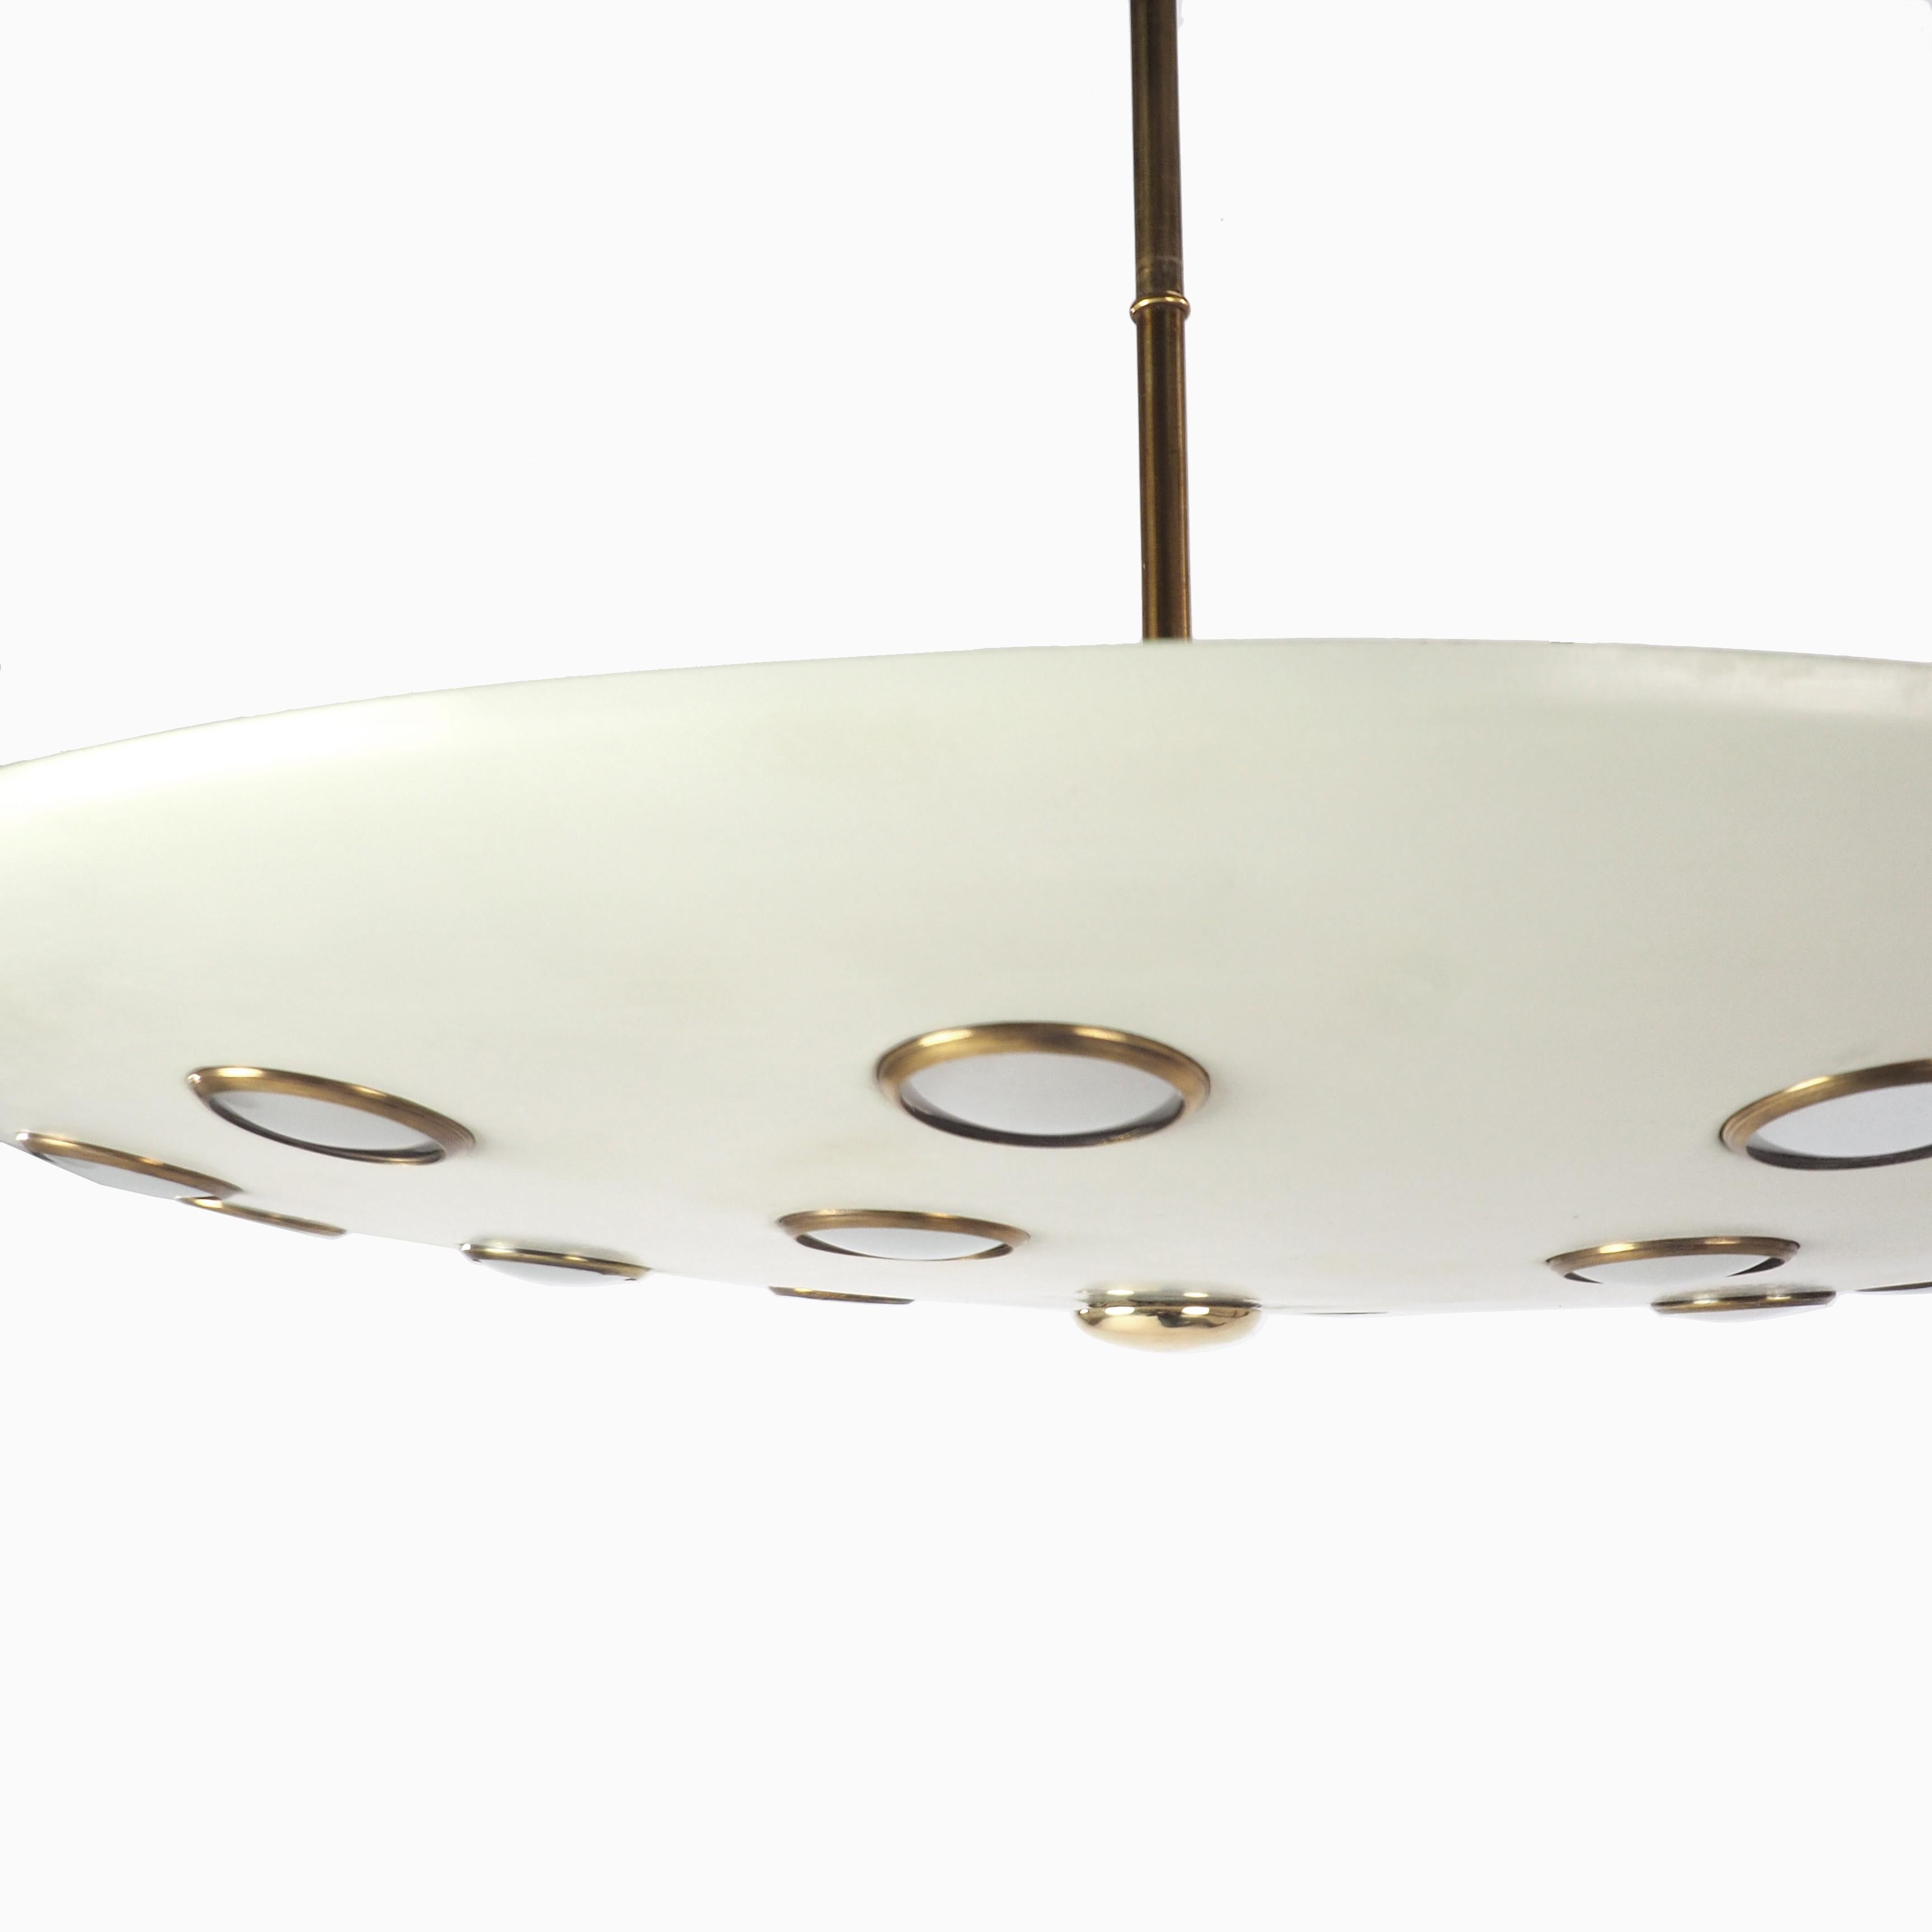 Lumen Milano midcentury Italian pendant lamp, circa 1950. Lacquered metal pendant light with a suspended dish indented with inserted brass circles and semi opaque glass lenses that diffuse light throughout the room.

Measures: L 82 x D 48 cm.